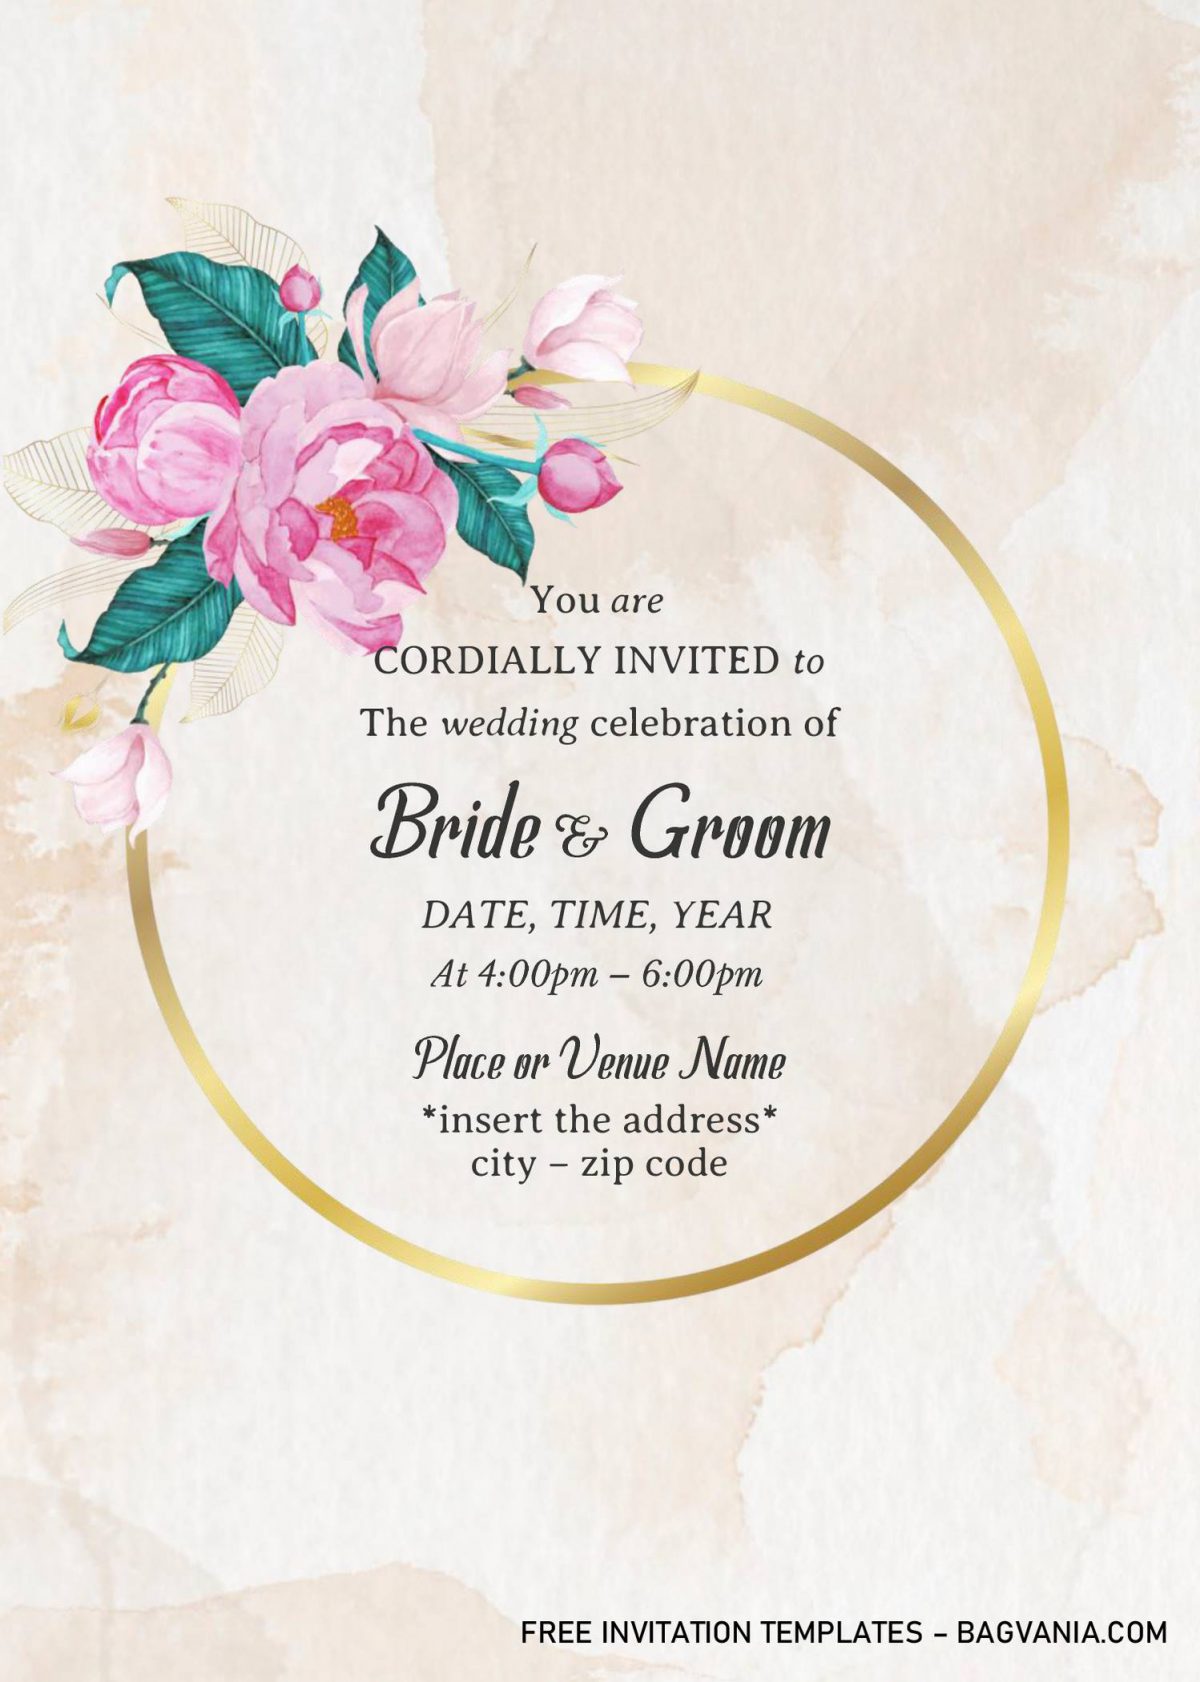 Gold Frame Floral Wedding Invitation Templates - Editable With MS Word and has watercolor floral